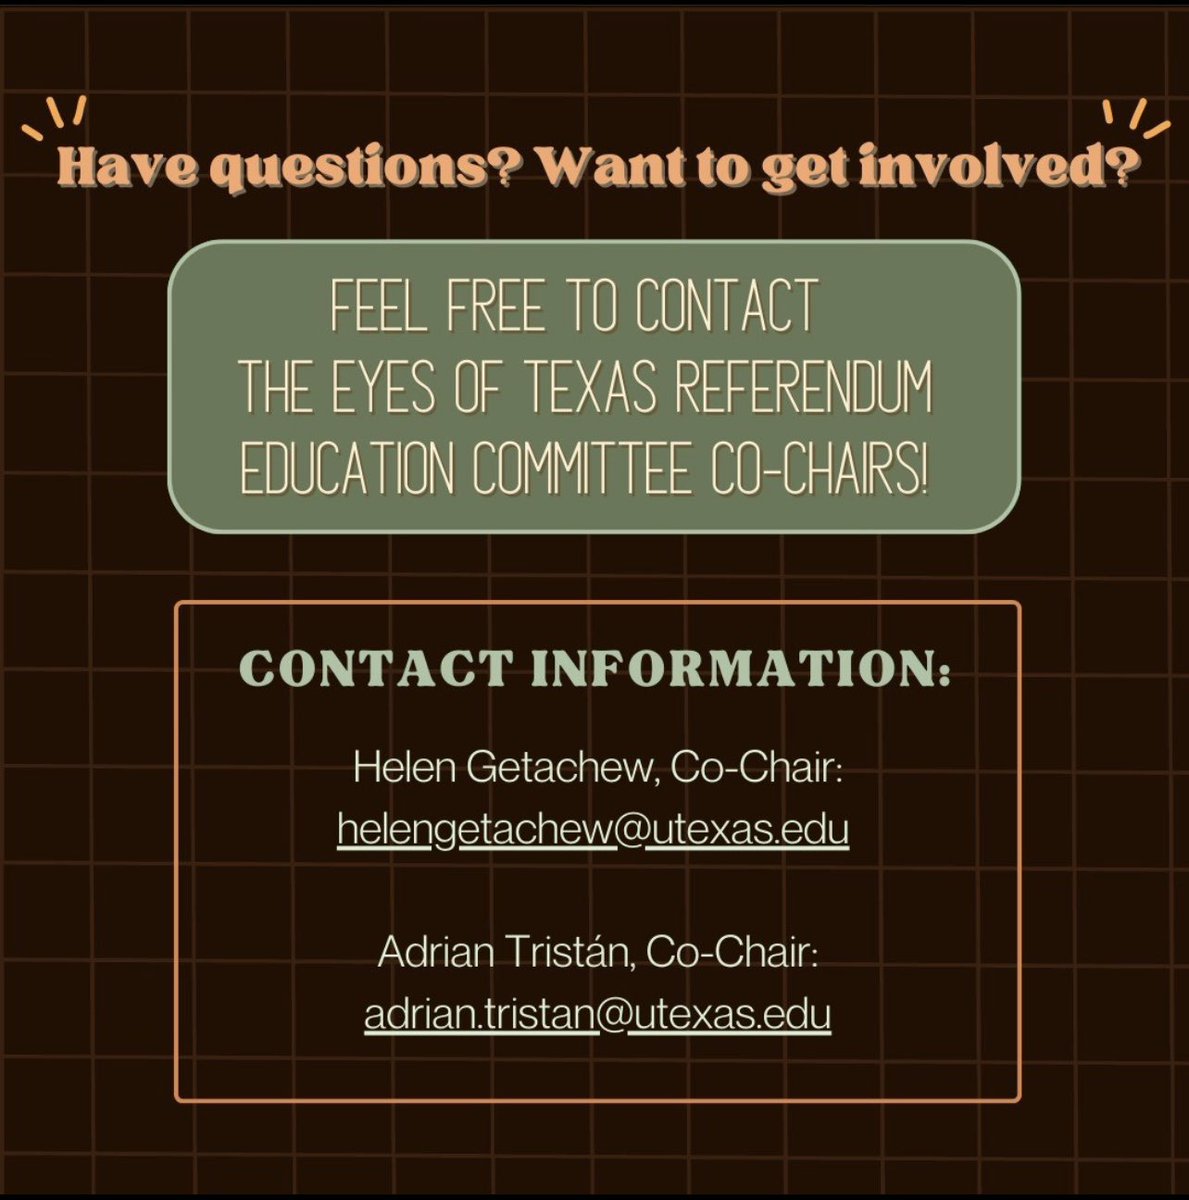 ‼️A non-binding referendum on The Eyes of Texas has been approved by the Office of the Dean of Students.‼️ Keep an eye out for more information, resources, and further updates. ⚡

#utsg #utaustin #ut23 #ut24 #ut25 #ut26 #studentgovernment #austin #austintexas